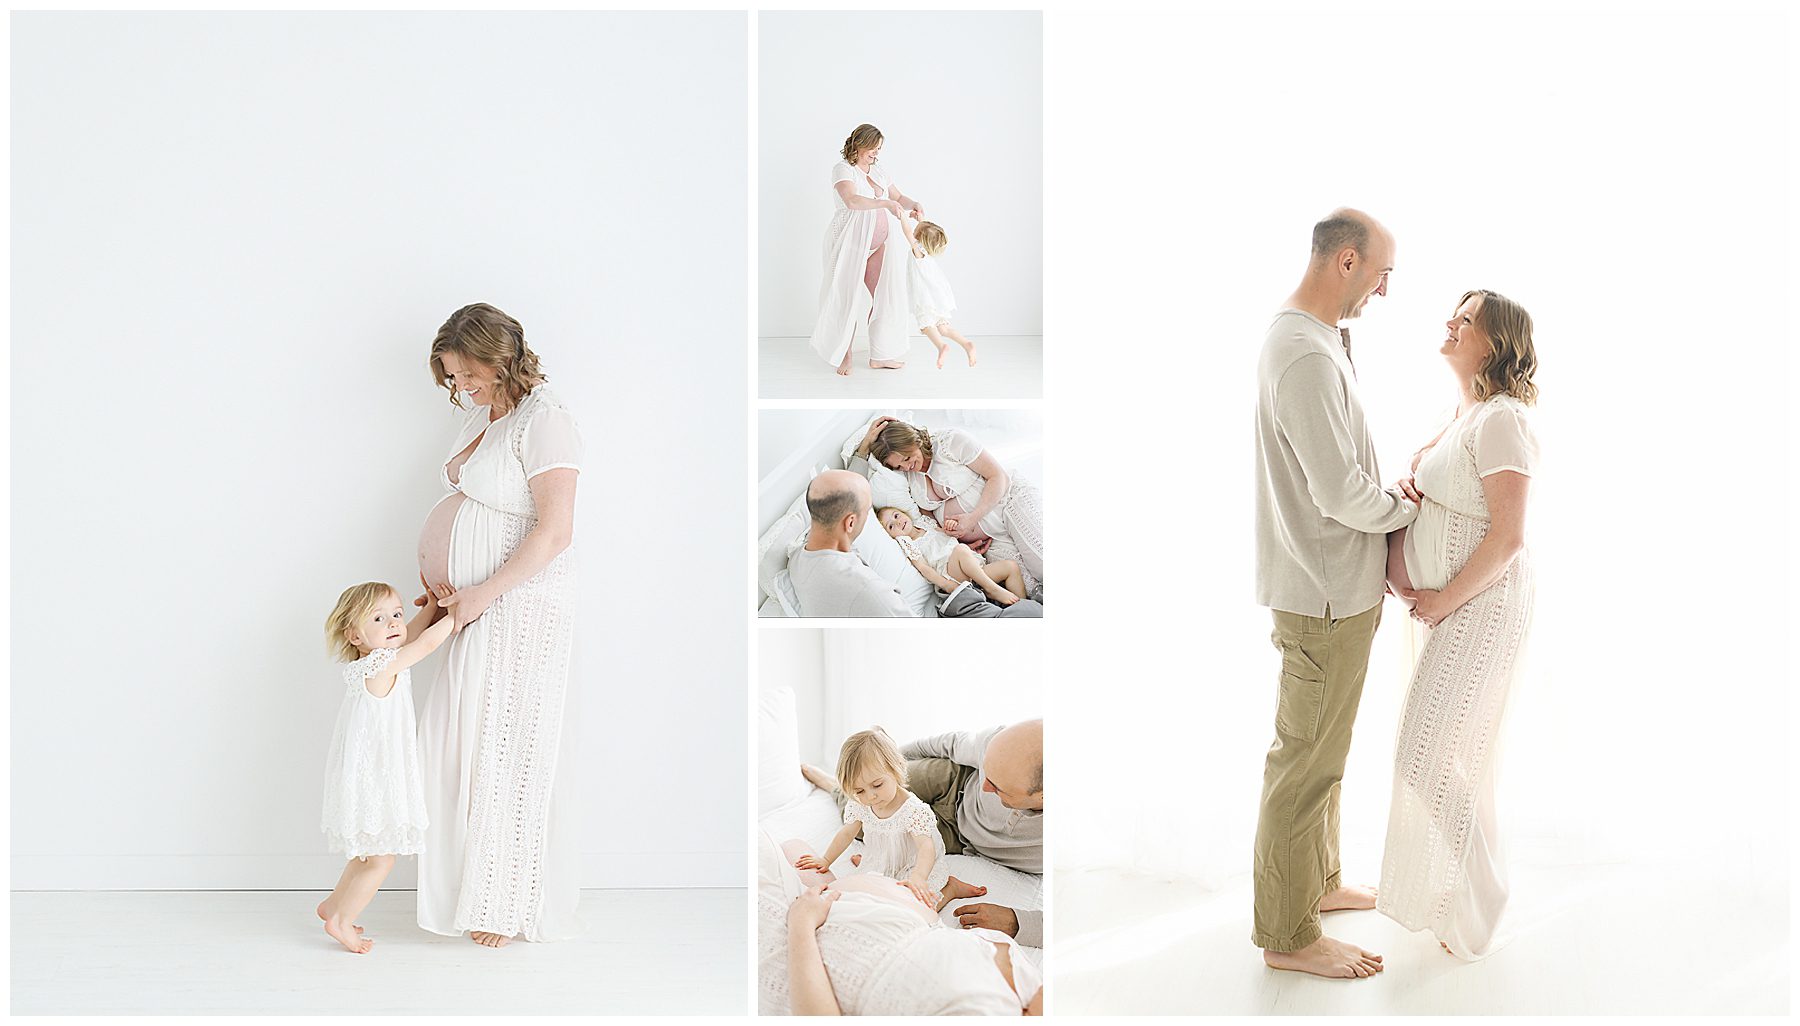 Fun family maternity photos in studio with a toddler